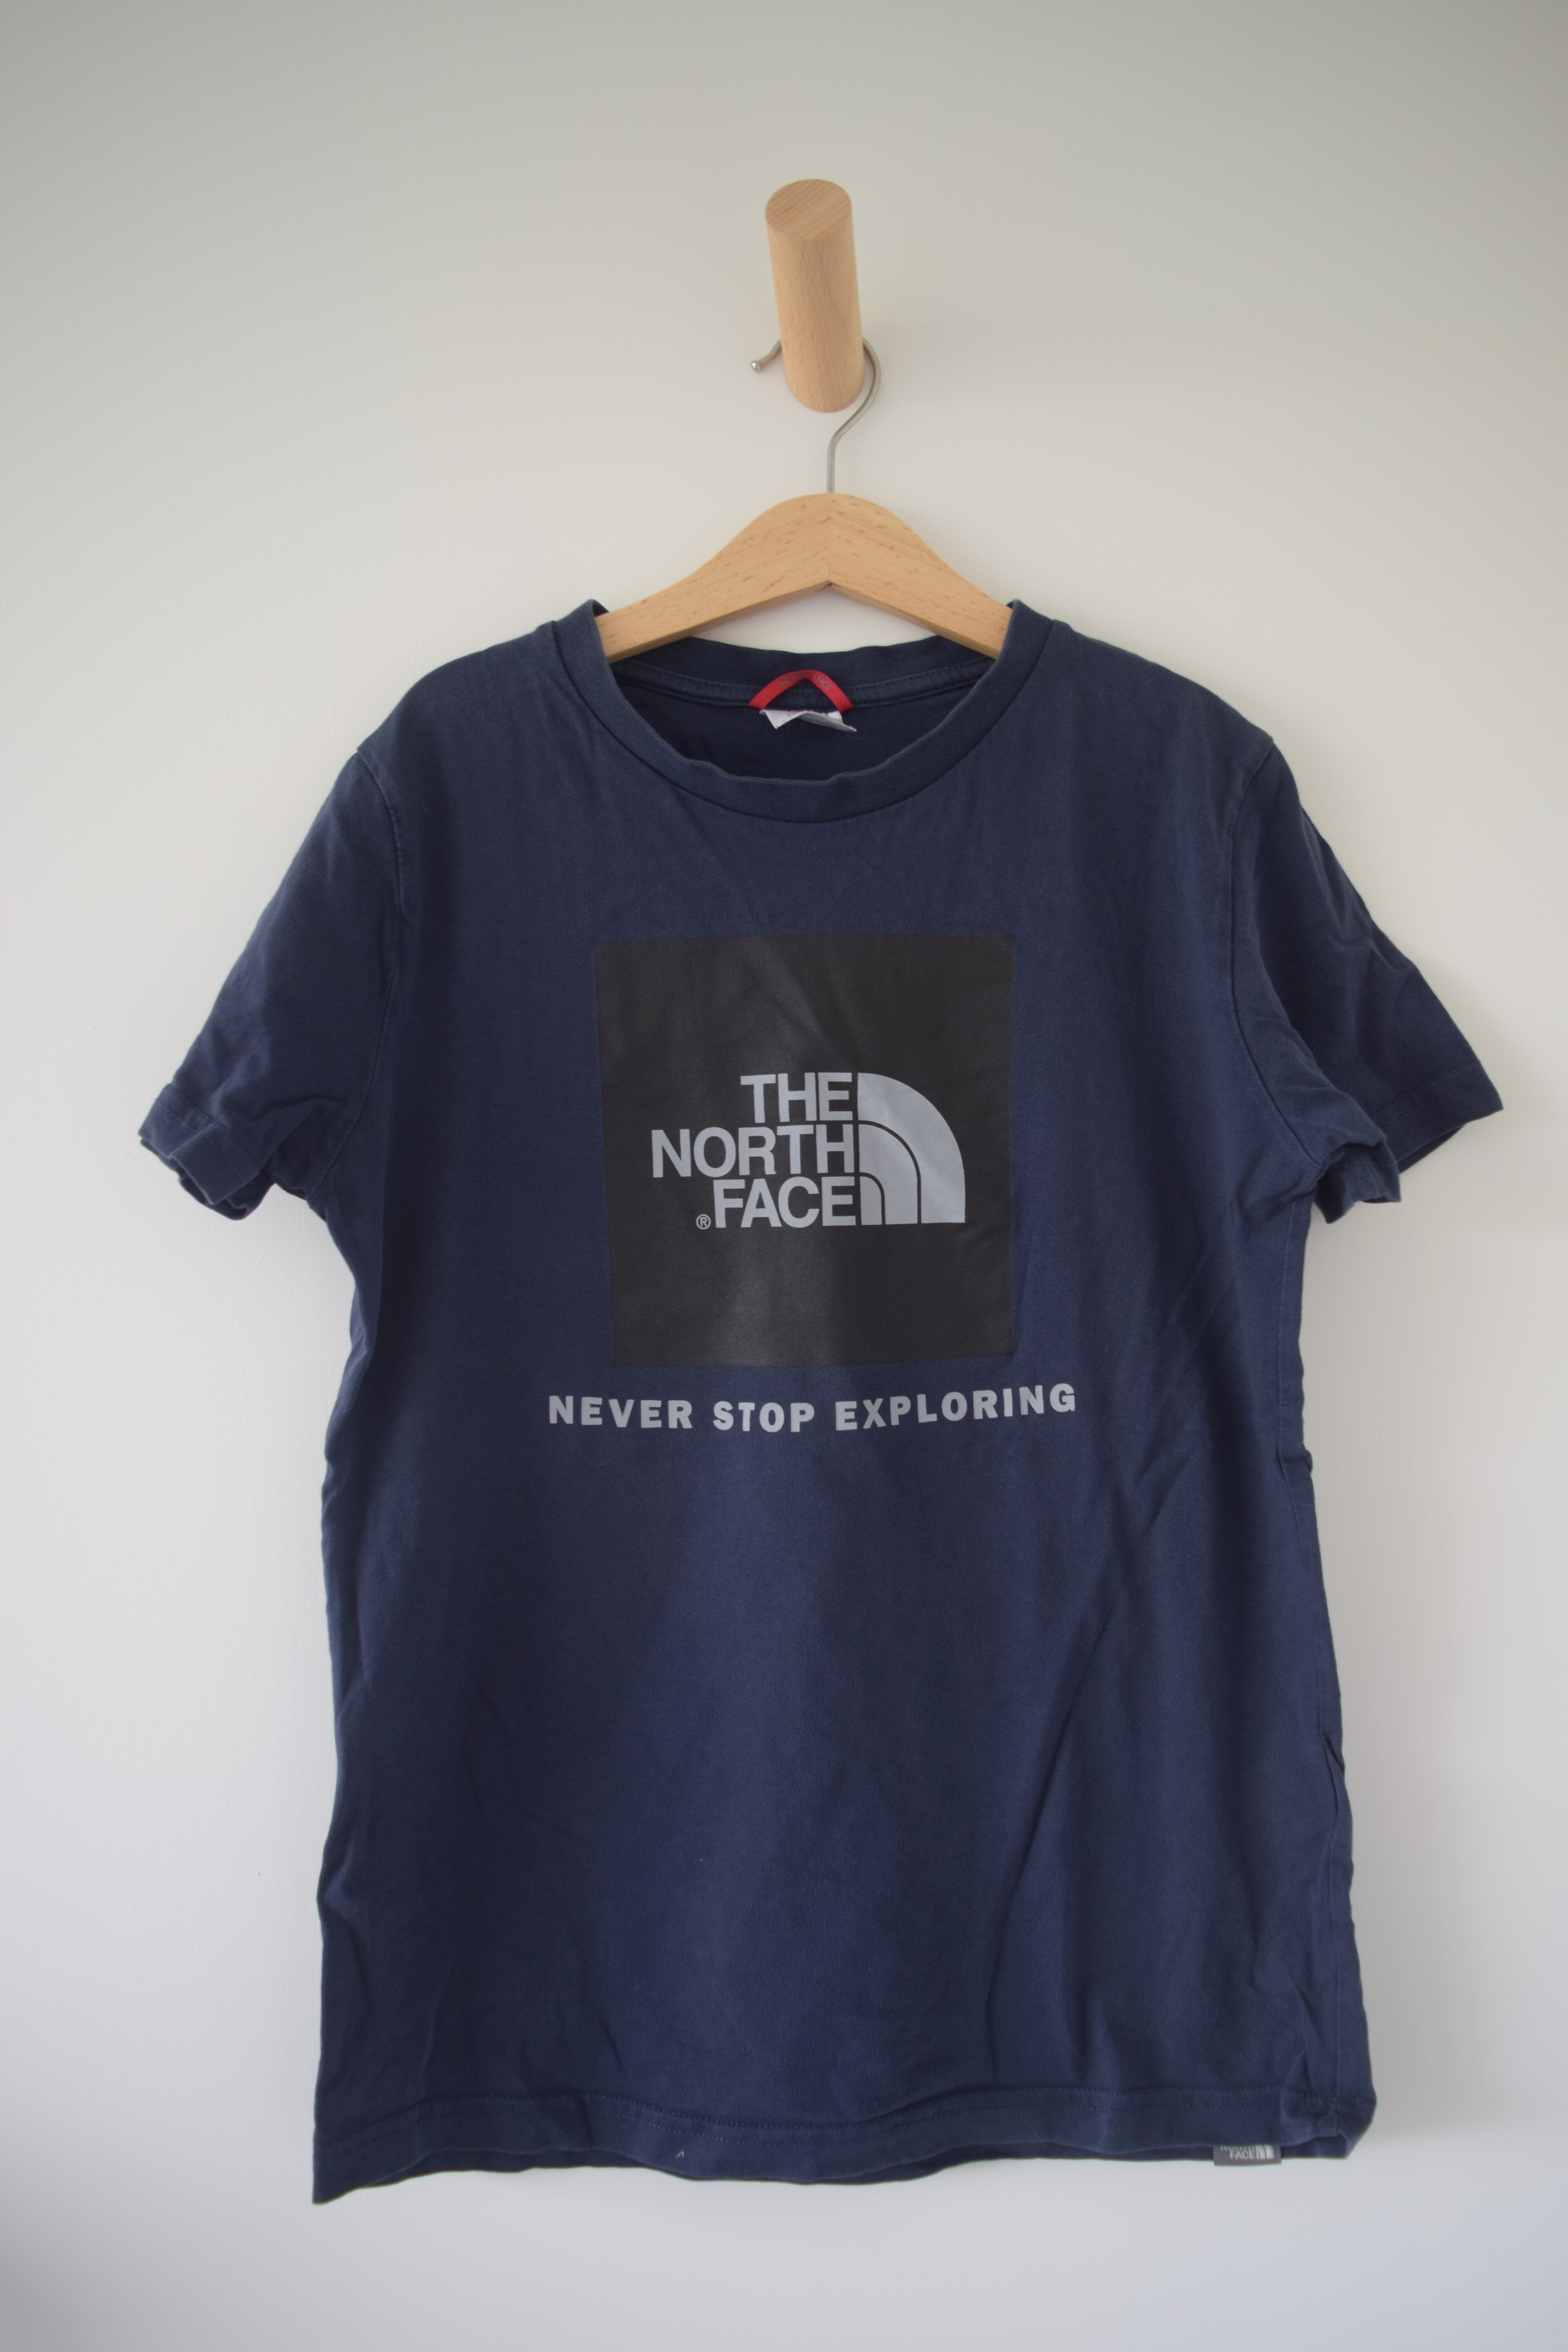 T-shirt, The North Face, 152 